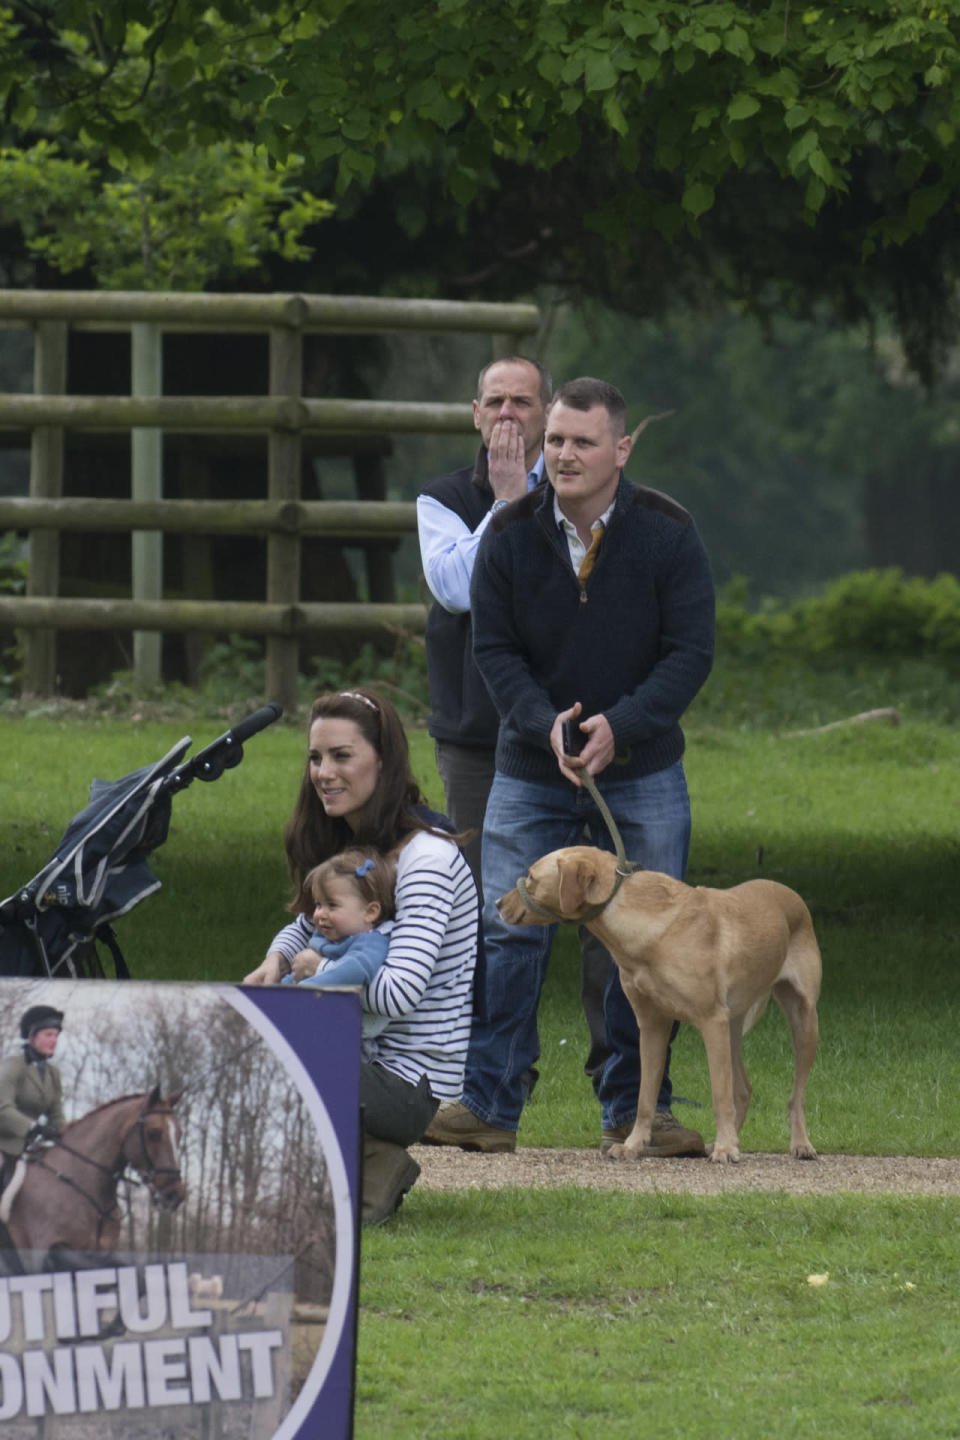 Princess Charlotte was also included in the day out, and looked sweet in a blue cardigan with matching bow.